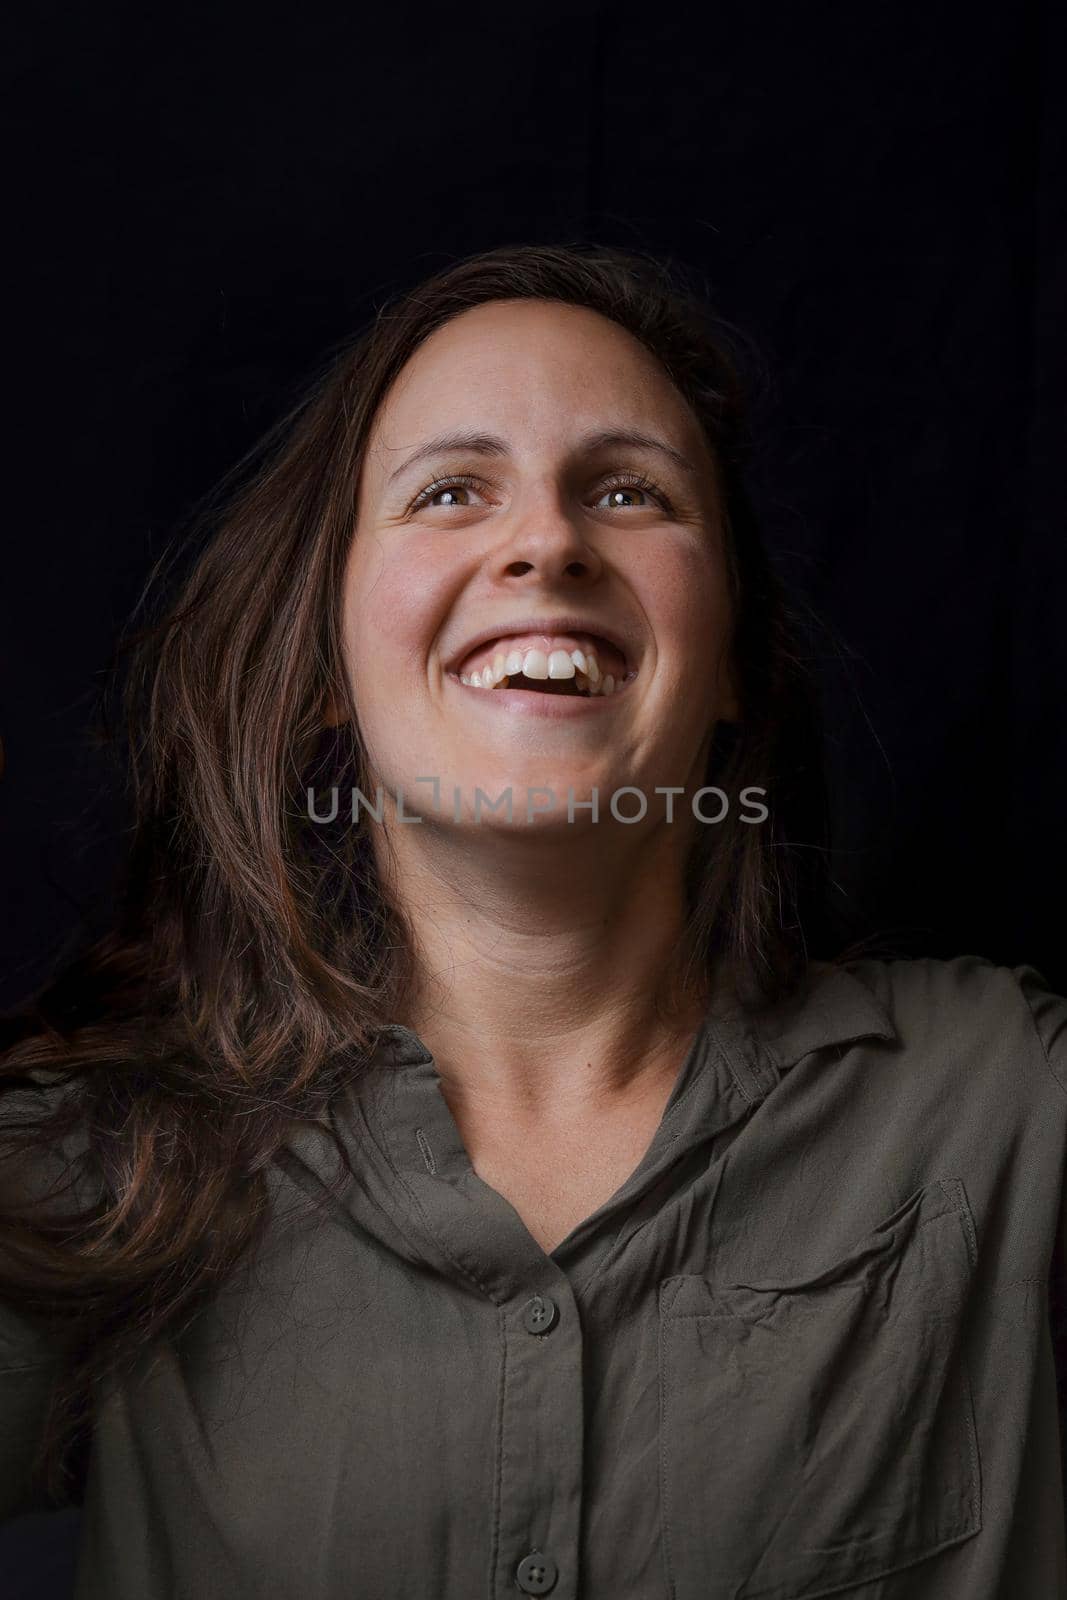 Cheerful happy young beautiful girl smiling laughing over black background. Close-up portrait of pretty young woman